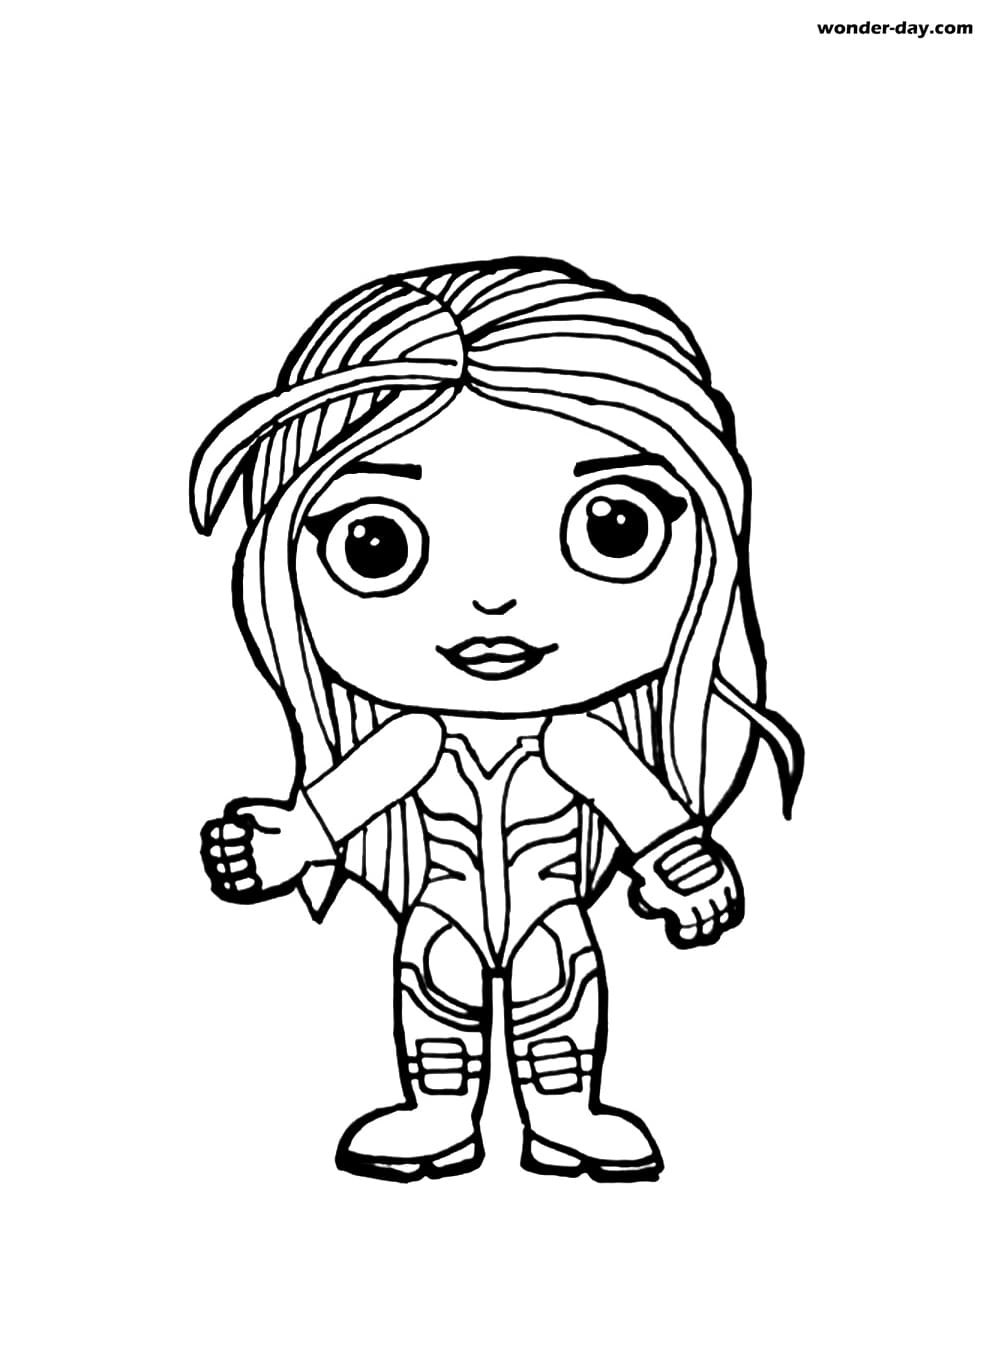 She Hulk Fortnite coloring pages   WONDER DAY — Coloring pages for ...